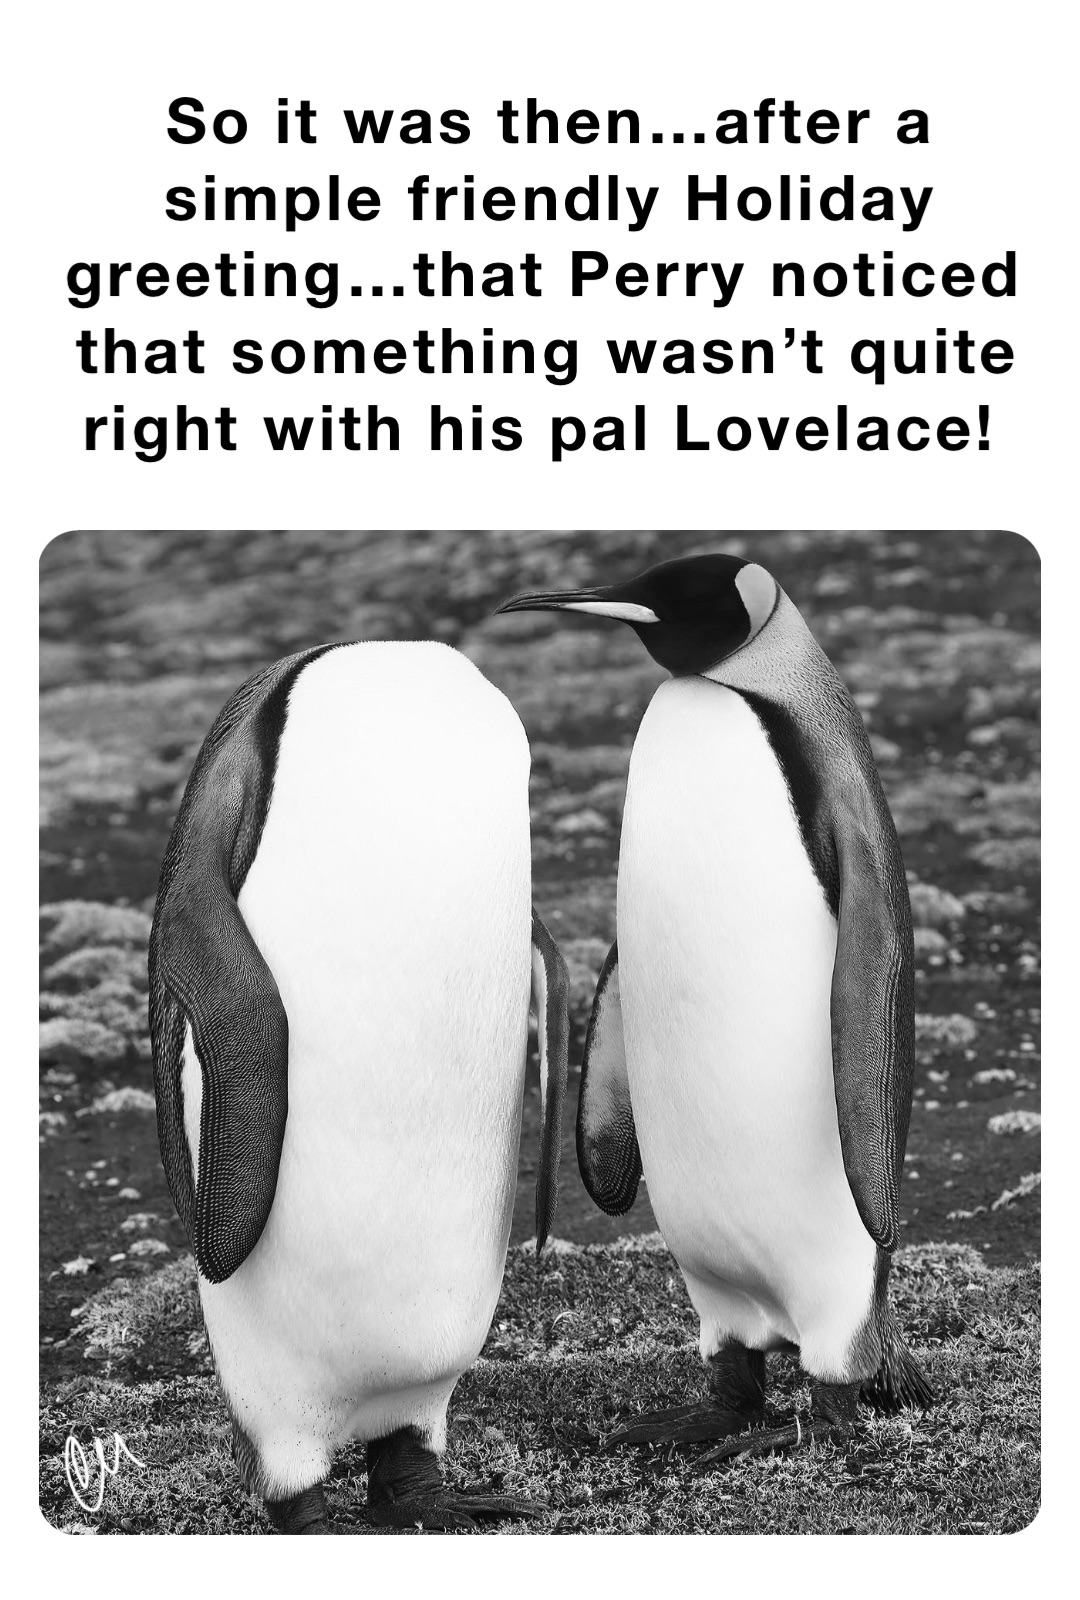 So it was then…after a simple friendly Holiday greeting…that Perry noticed that something wasn’t quite right with his pal Lovelace!